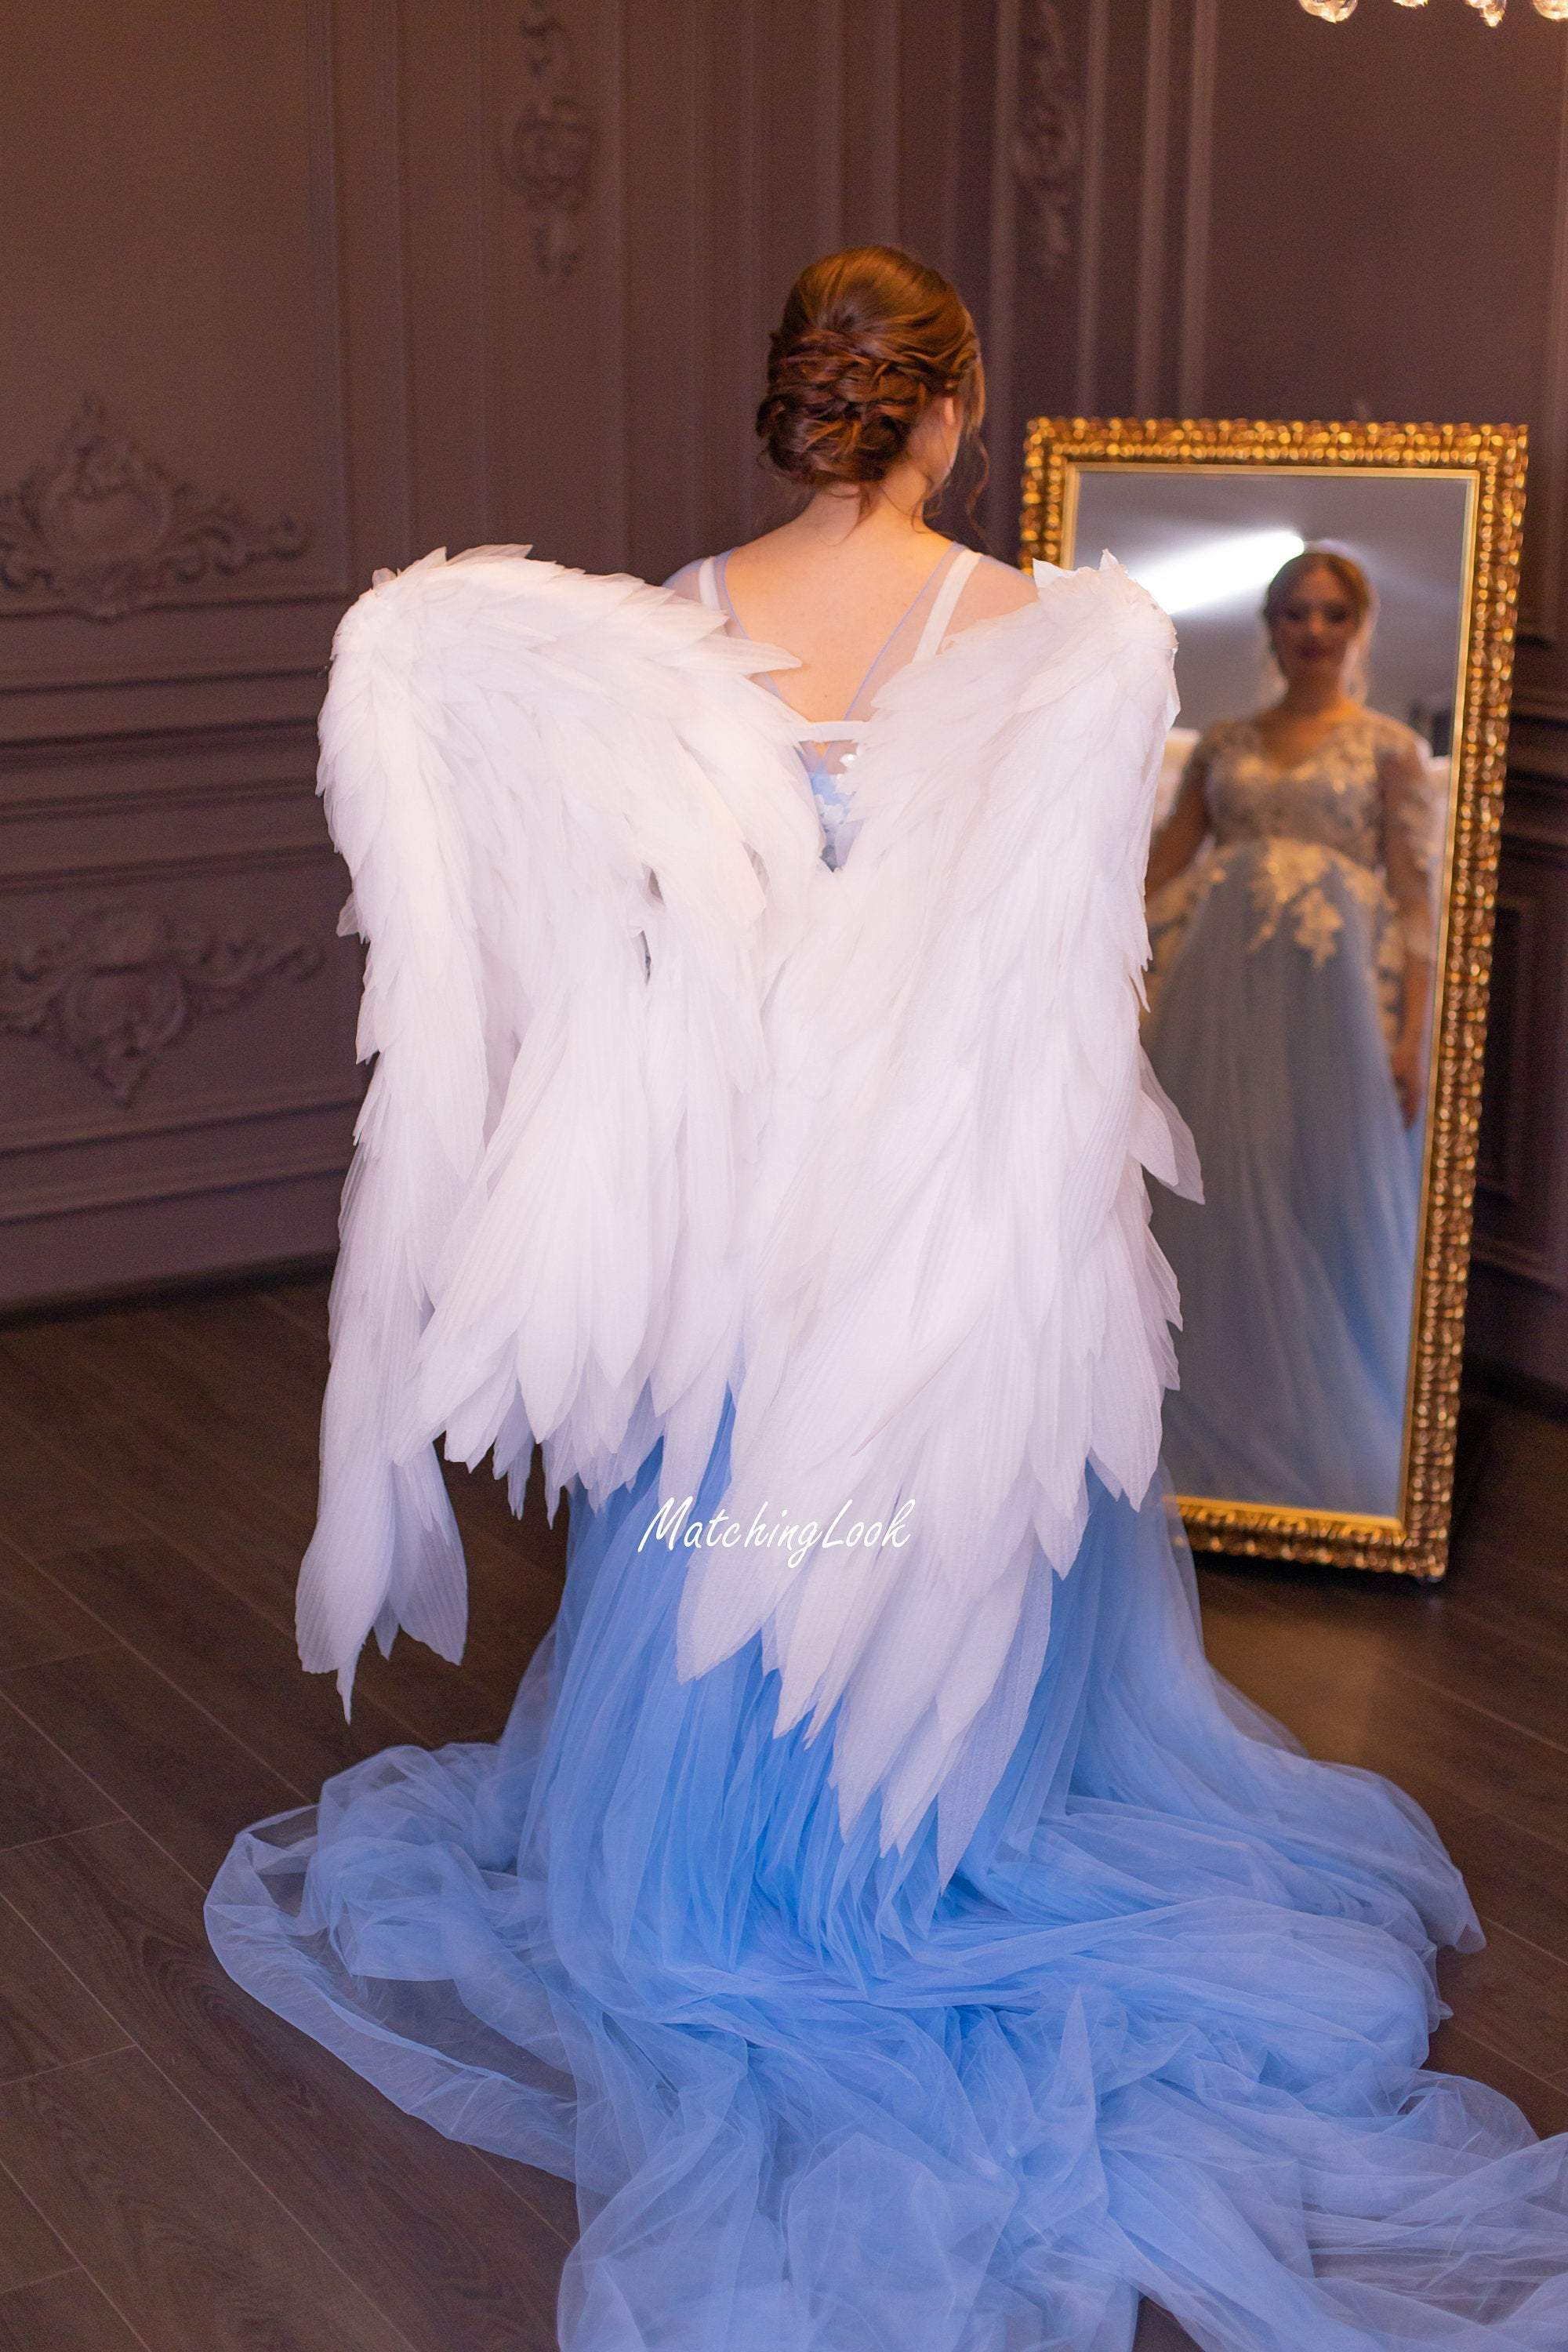 Aggregate more than 135 angel wing dress super hot